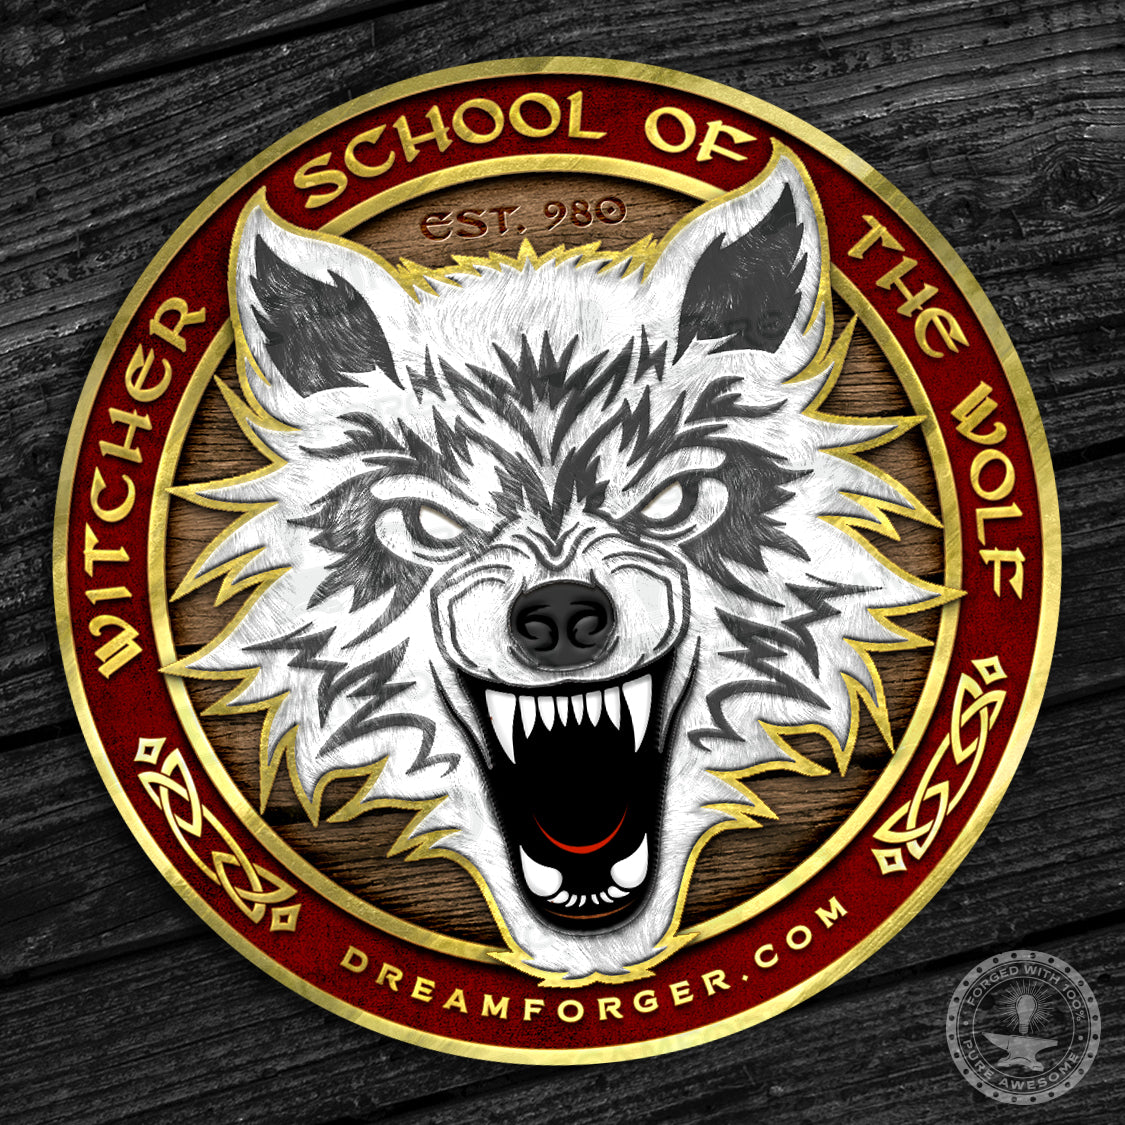 The Witchering "School of the Wolf" GITD Magical Decal